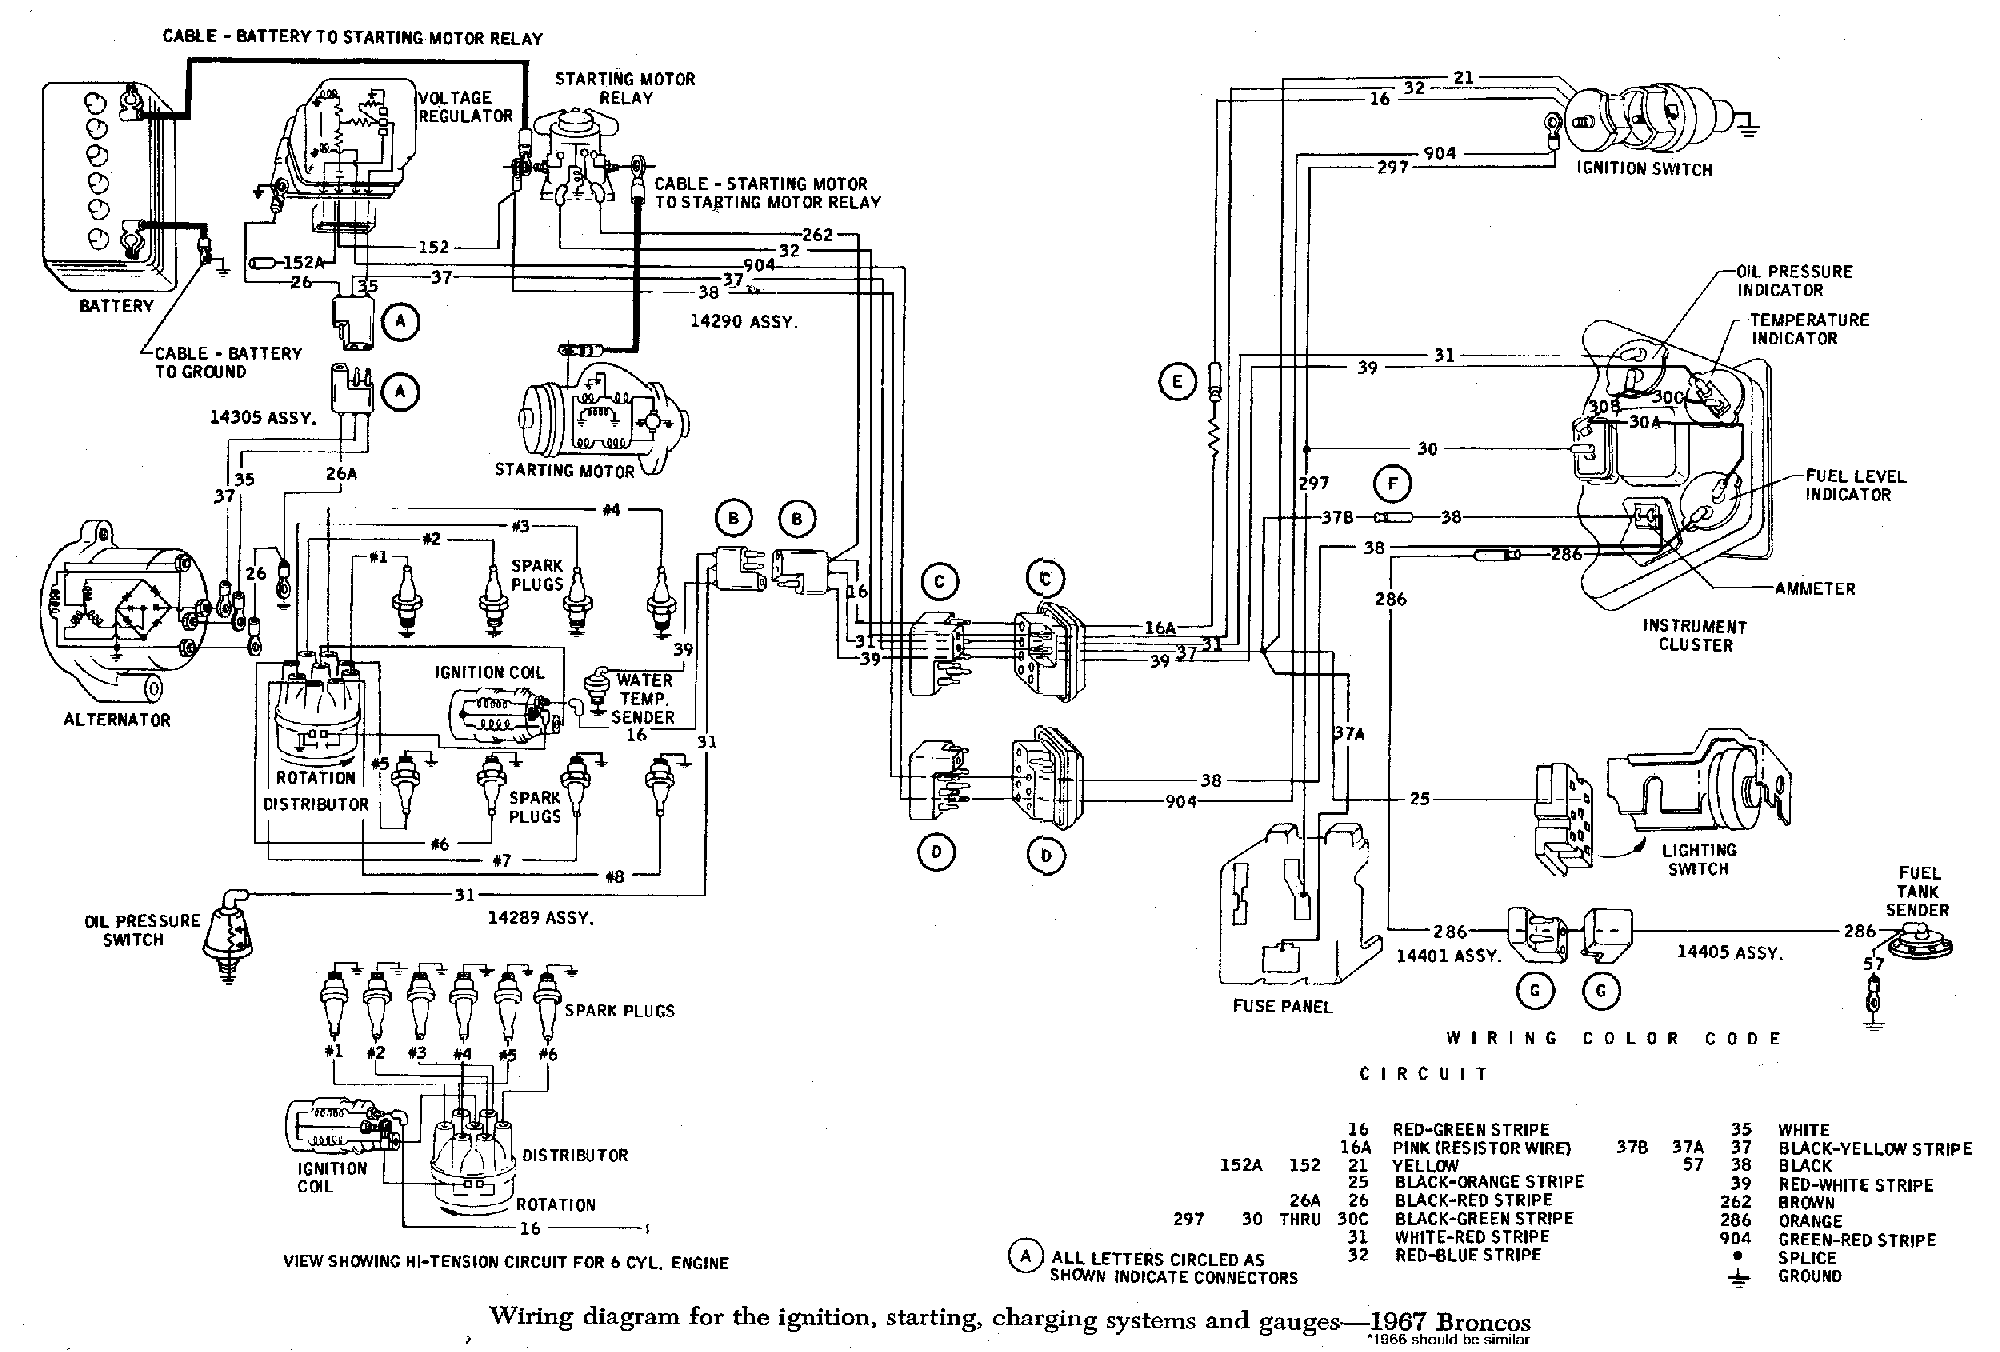 Wiring Problem   Help - 66-77 Early Bronco Tech Support